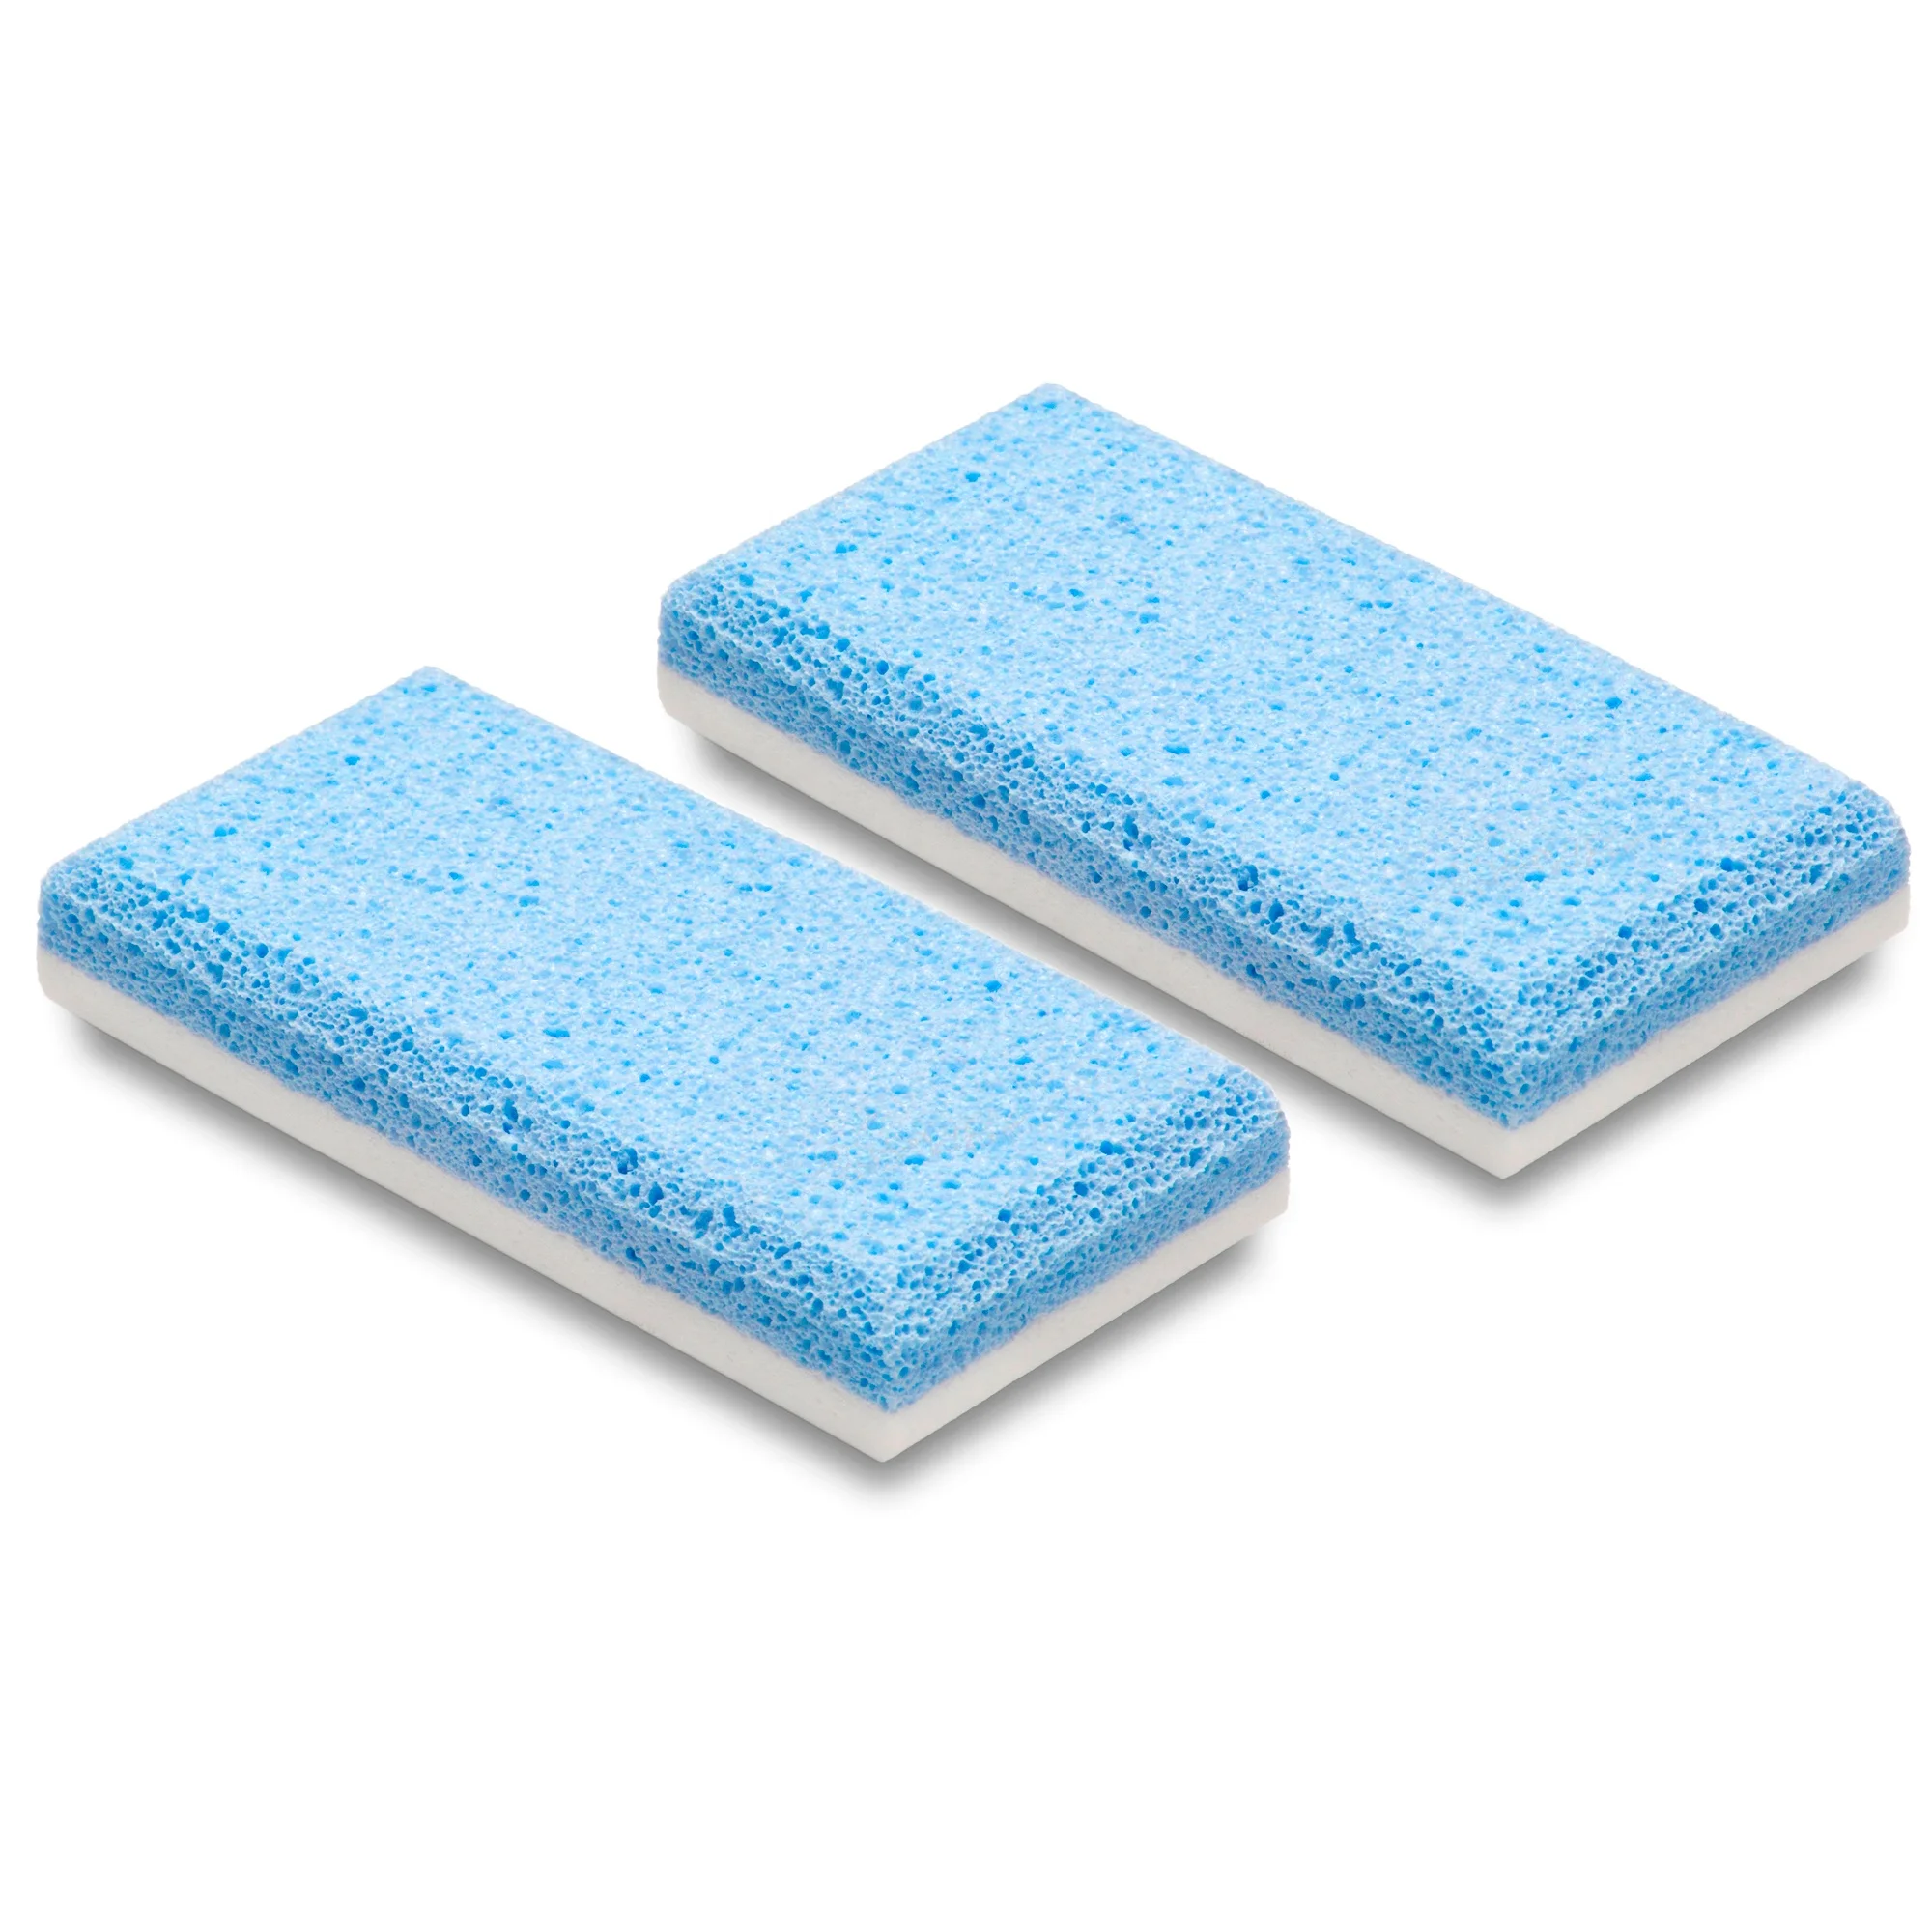 Pumice stone dual action - Premium Quality - Only manufacturer in the world that makes this pumice stone in one piece.